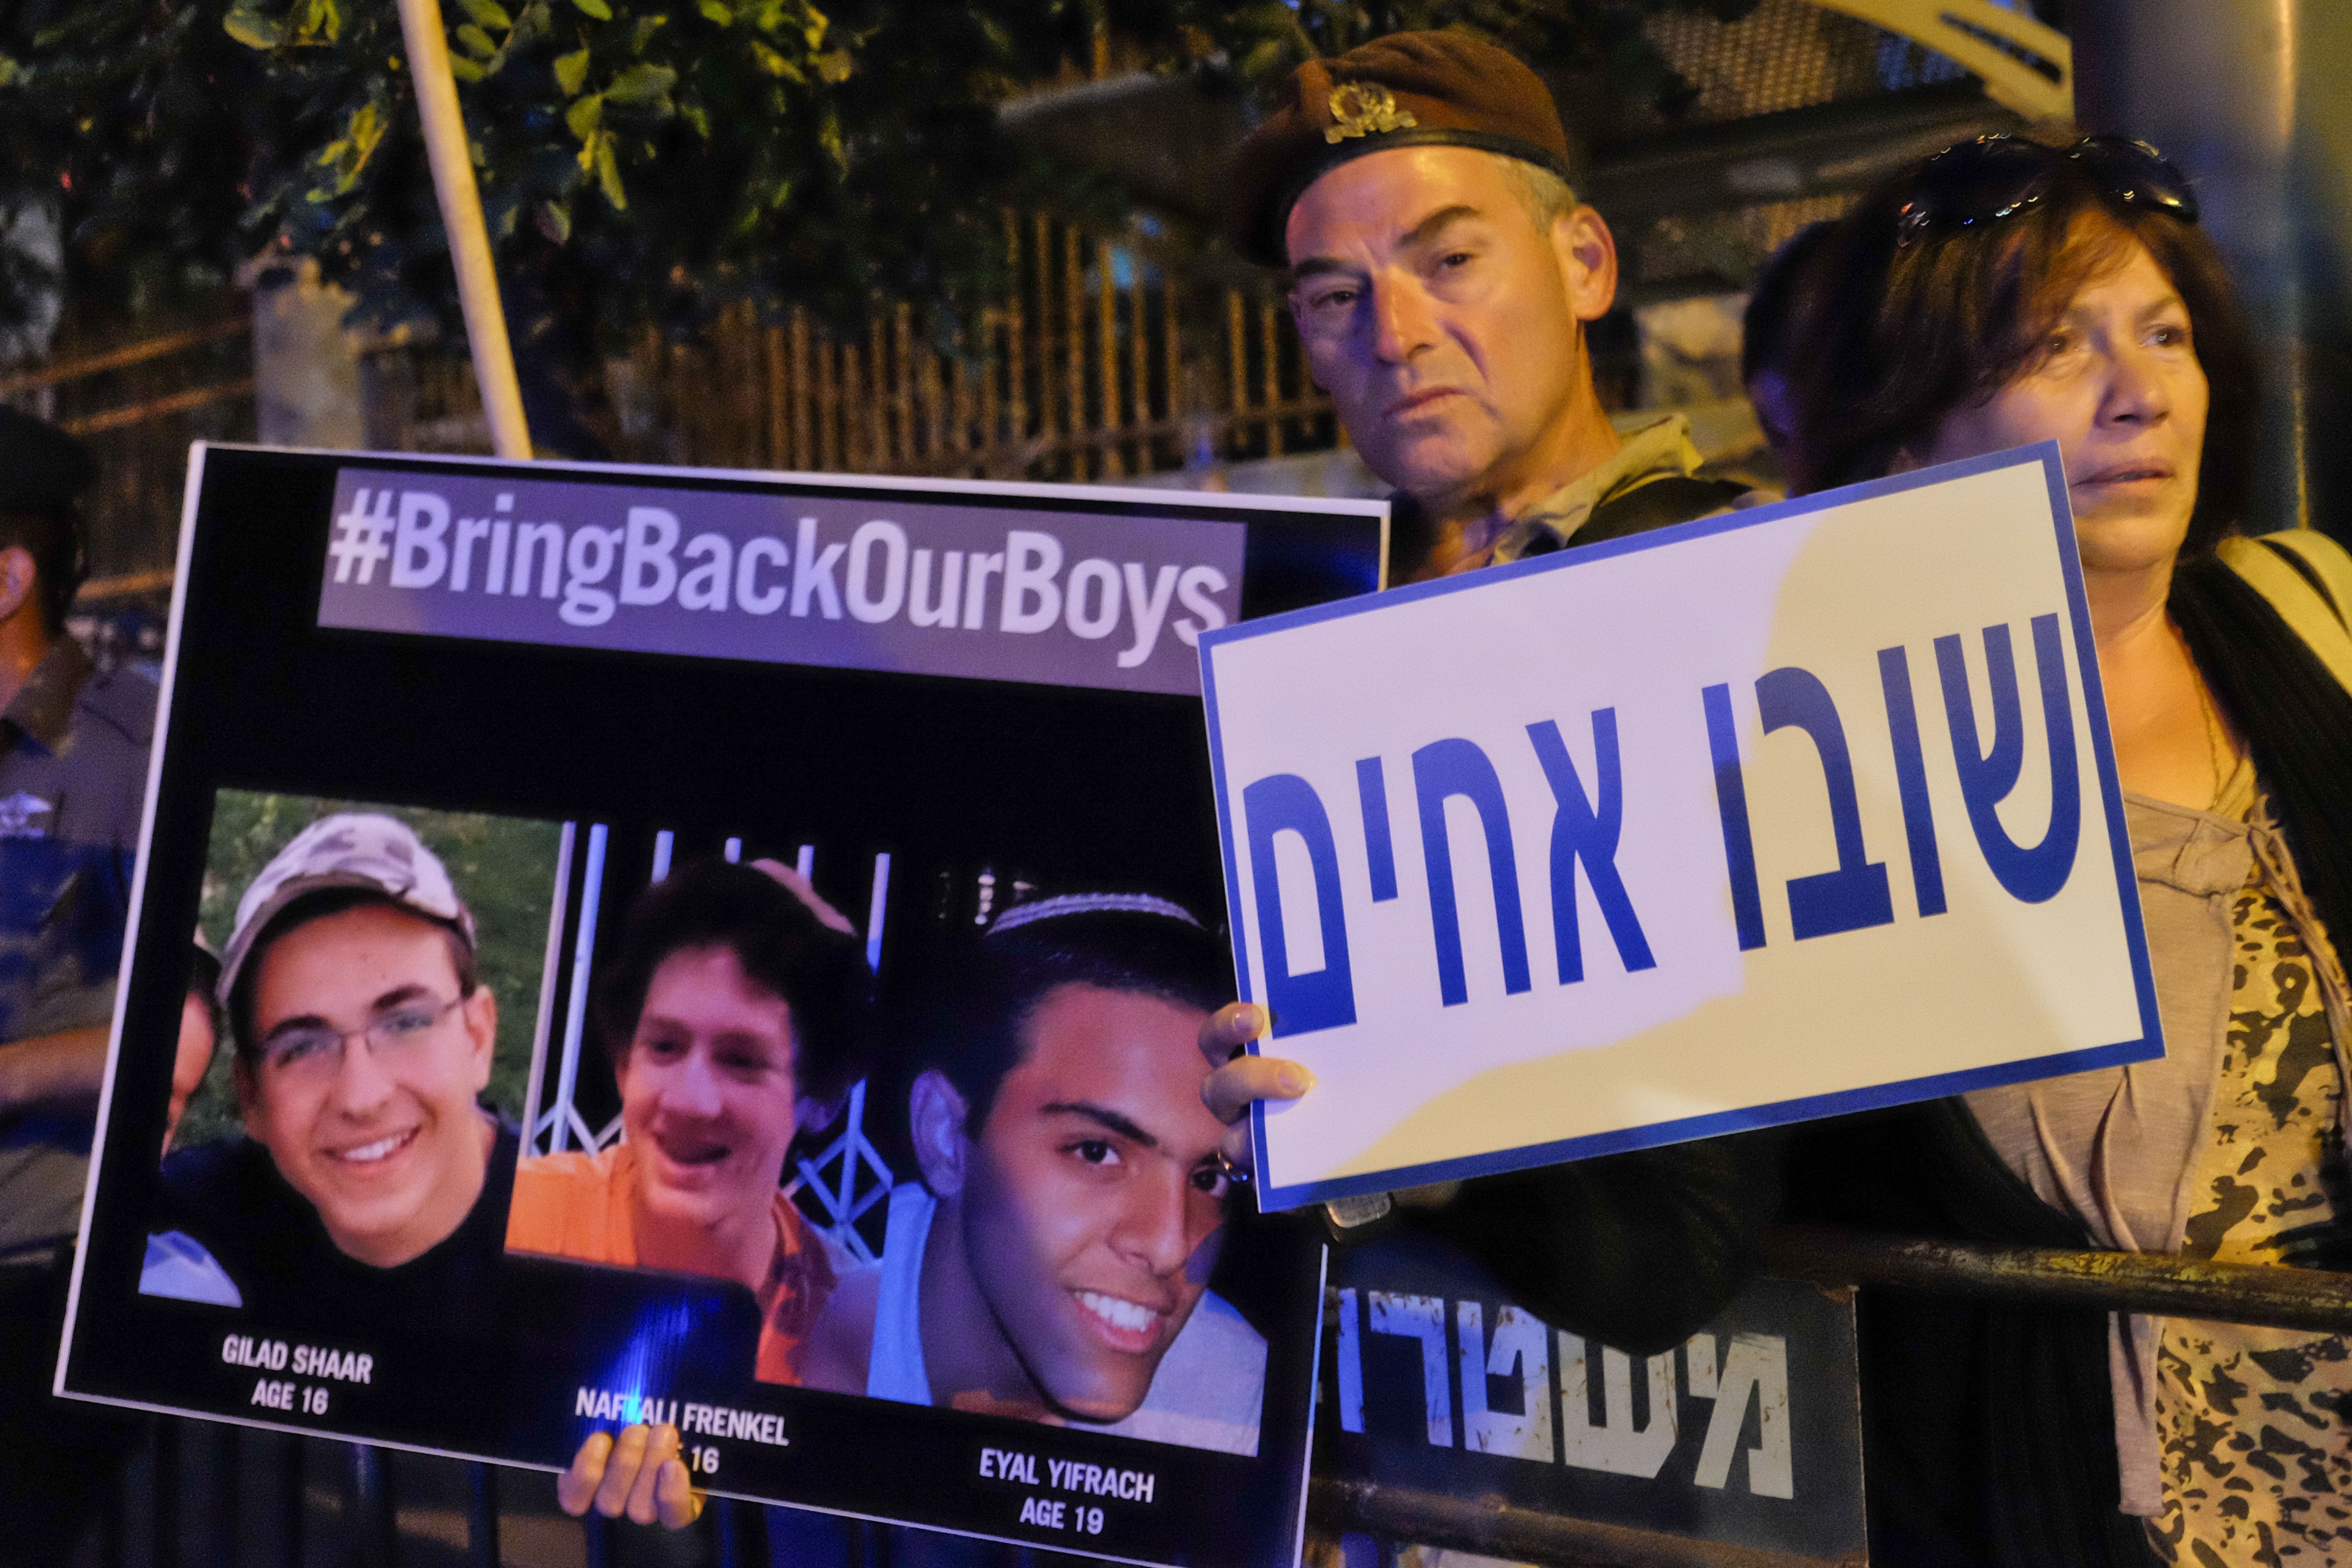 Right-wing activists protest opposite of the Israeli Prime Minister's residence in Jerusalem on June 17, 2014, calling on the government to punish Palestinians until three kidnapped Israeli teenagers are returned safely (Nir Alon—ZUMA Press/Corbis)